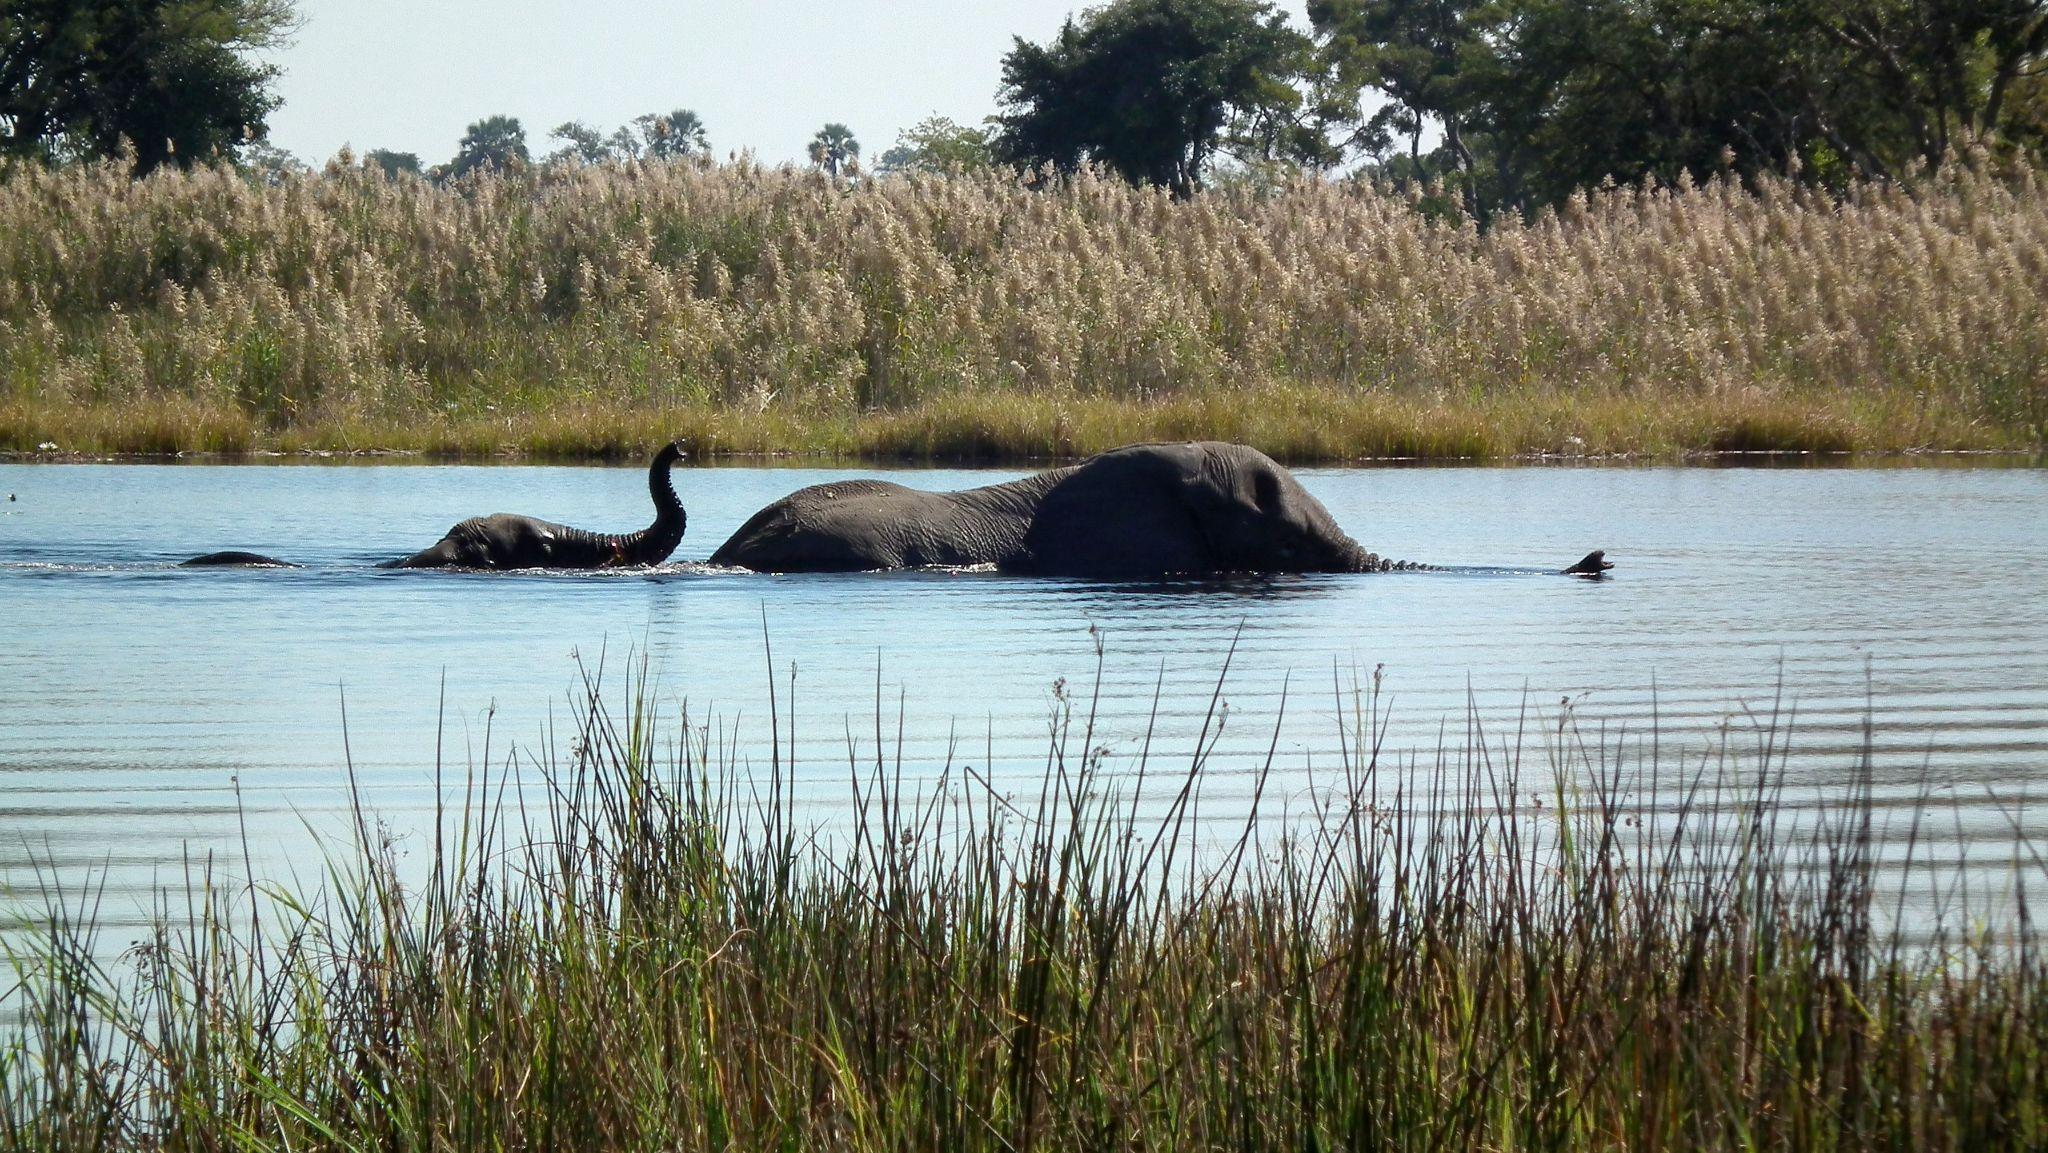 An image of elephants crossing the river in Botswana which was the photographer’s dream destination